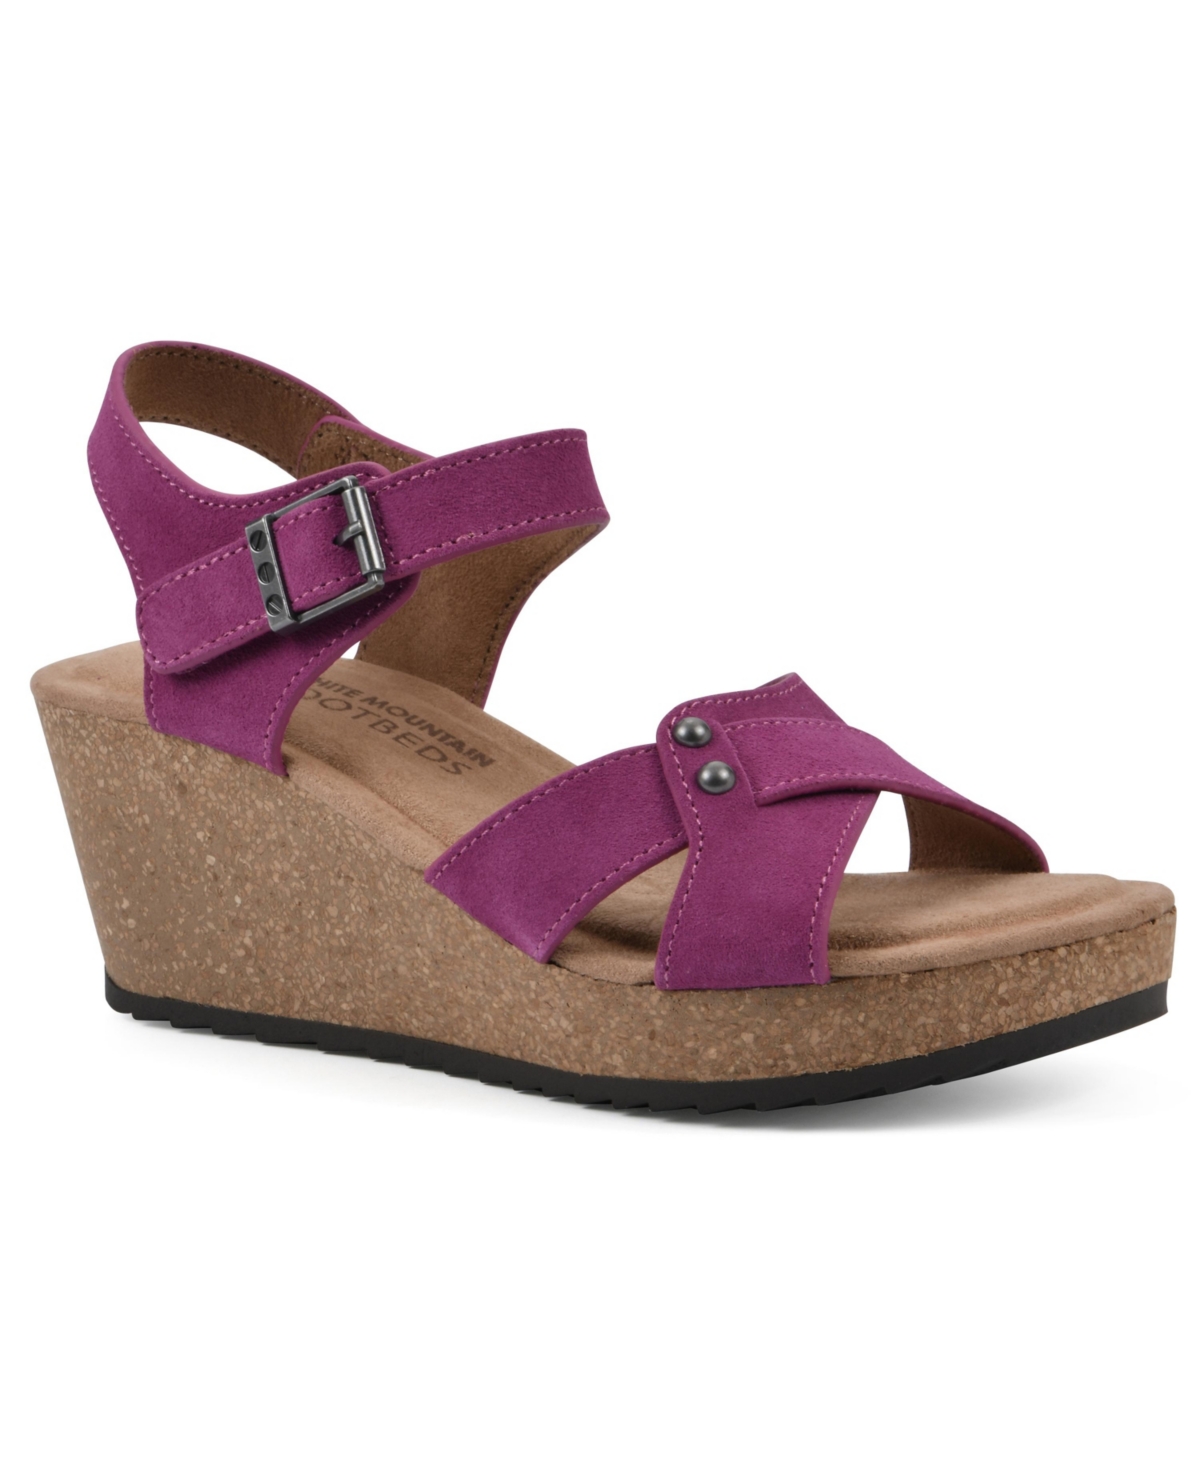 Women's Prezo Footbed Wedge Sandals - Brown Leather